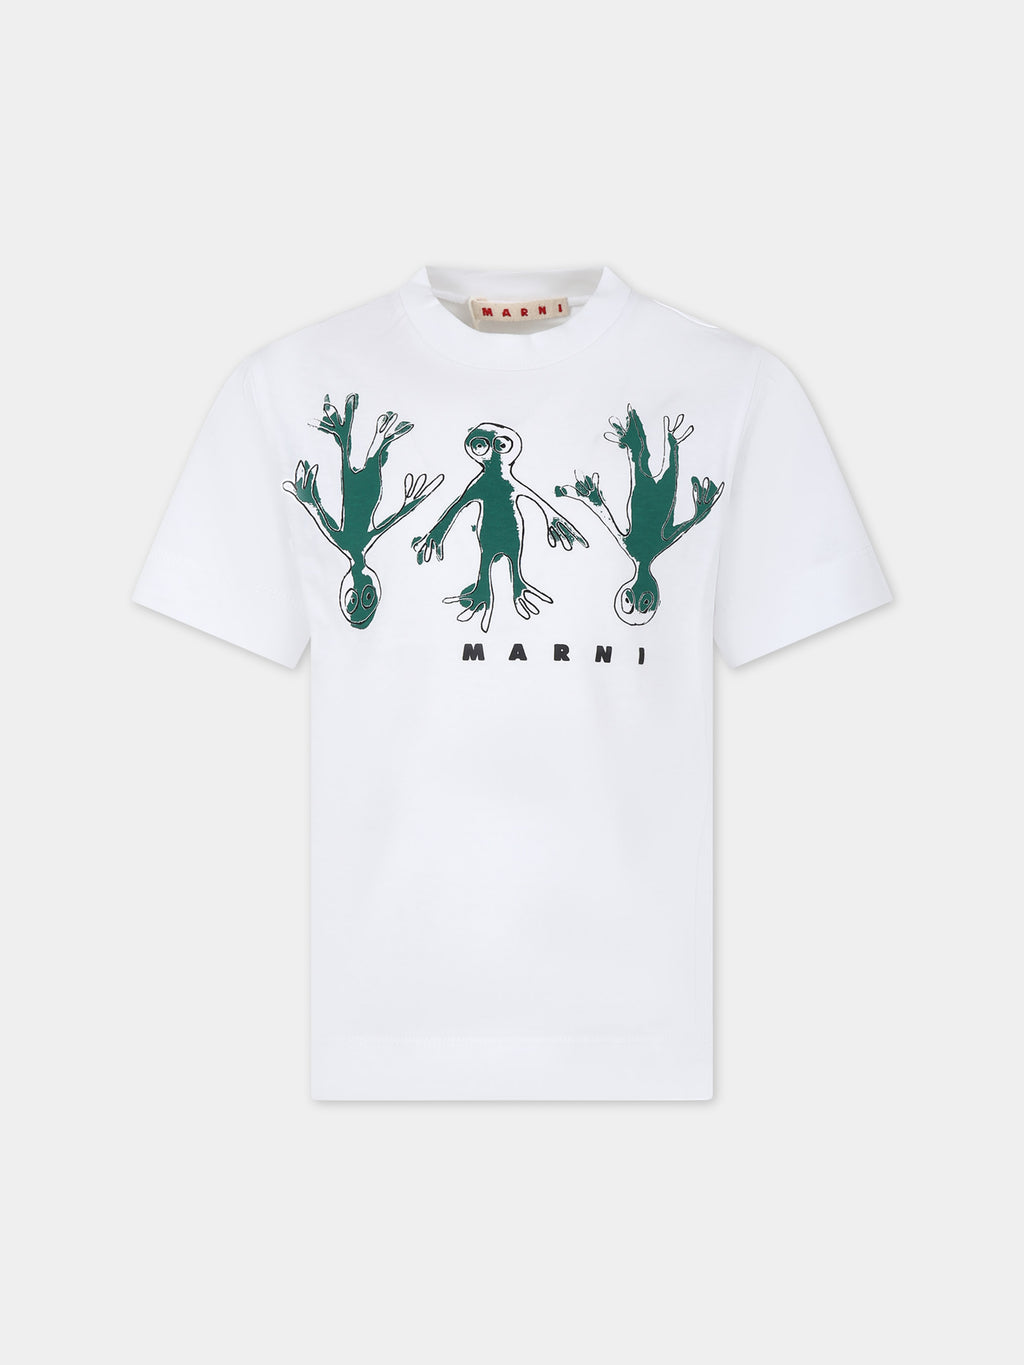 White t-shirt for kids with logo and print